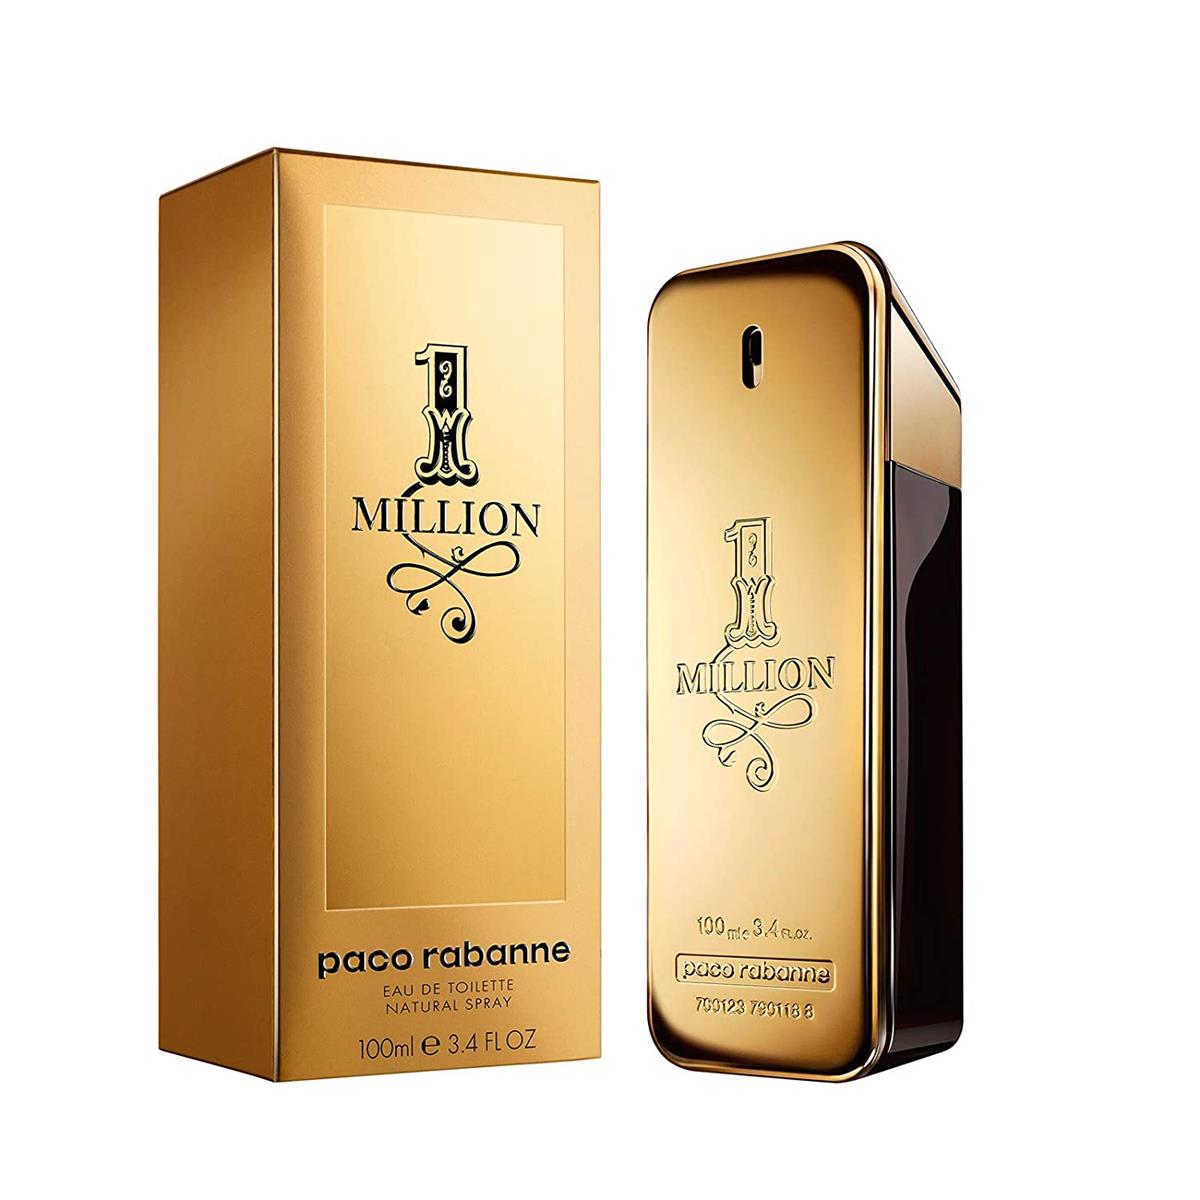 One Million EDT in Pakistan for Rs. 17000.00 | The Perfume Palette